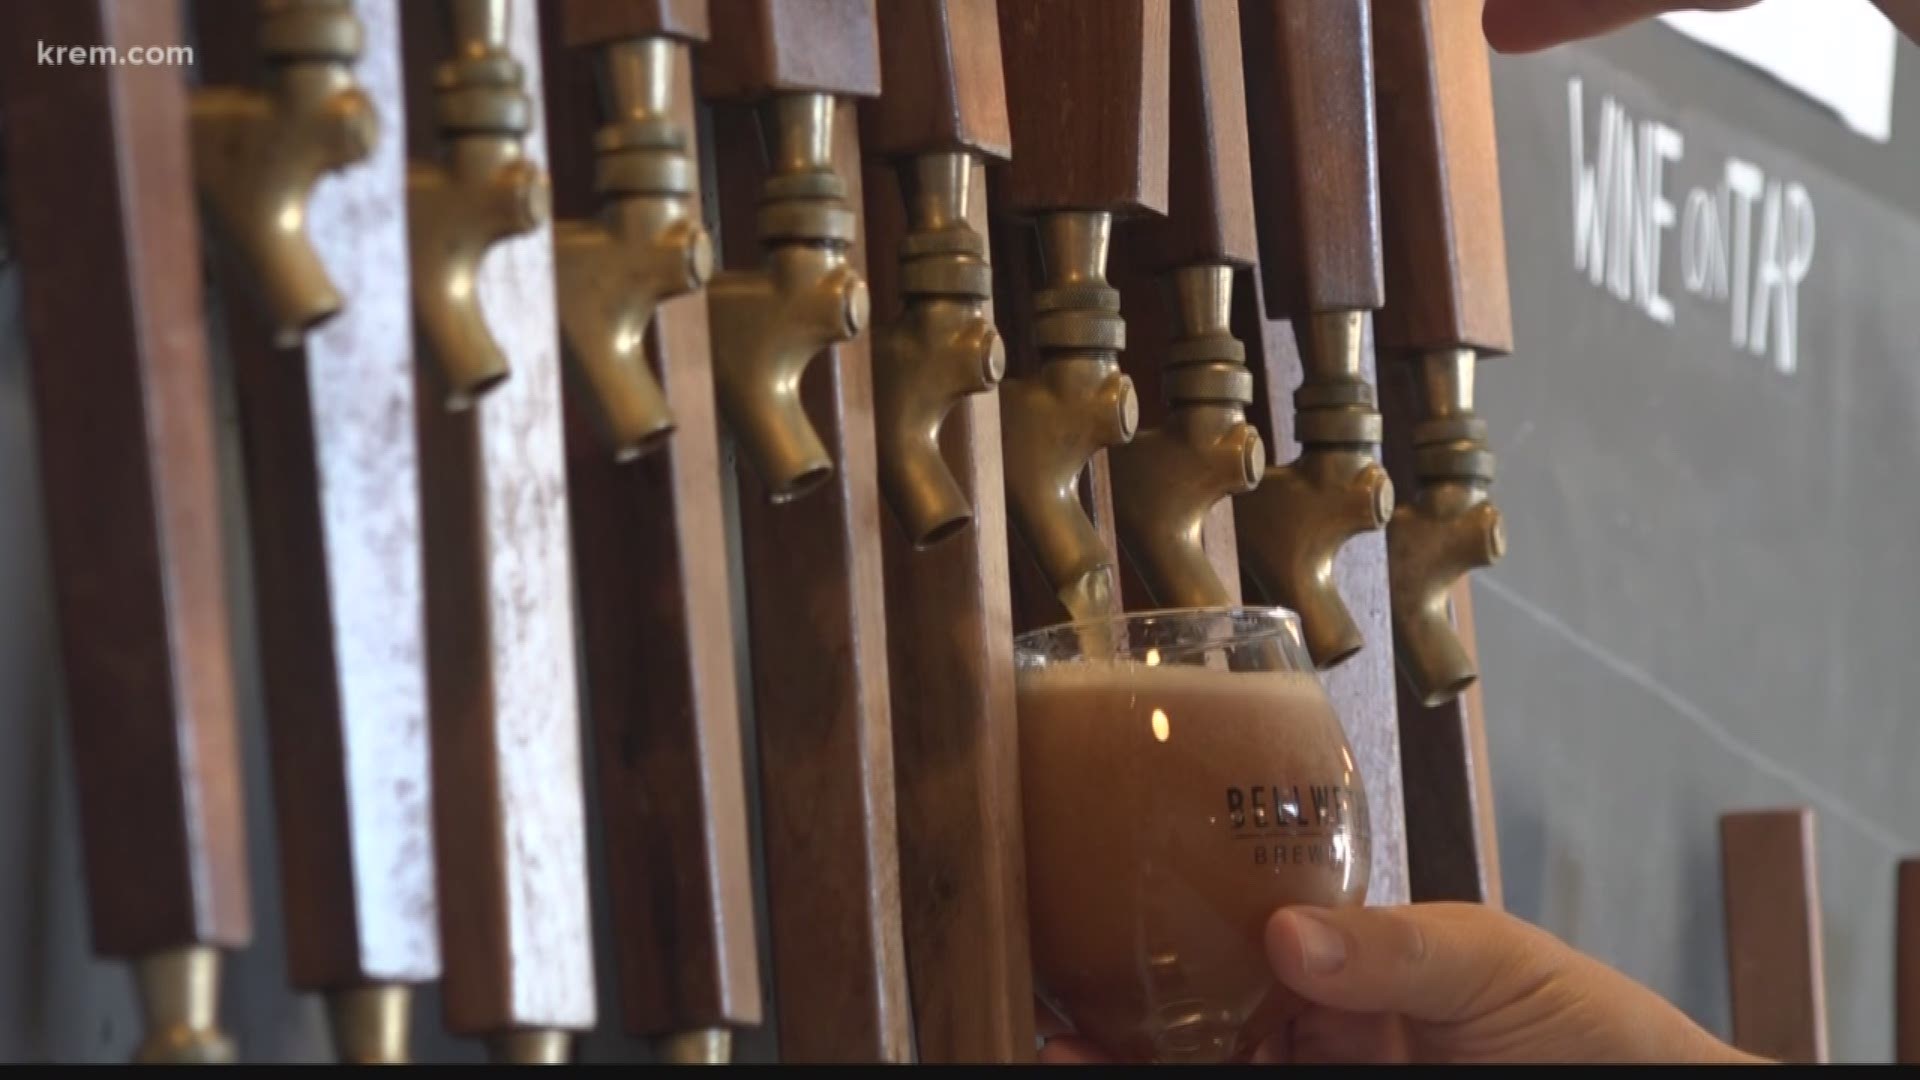 Millwood, Humble Abode and Mountain Lakes breweries all opened around the area in the past year. The Washington Beer Commission calls Spokane a "brewery destination".